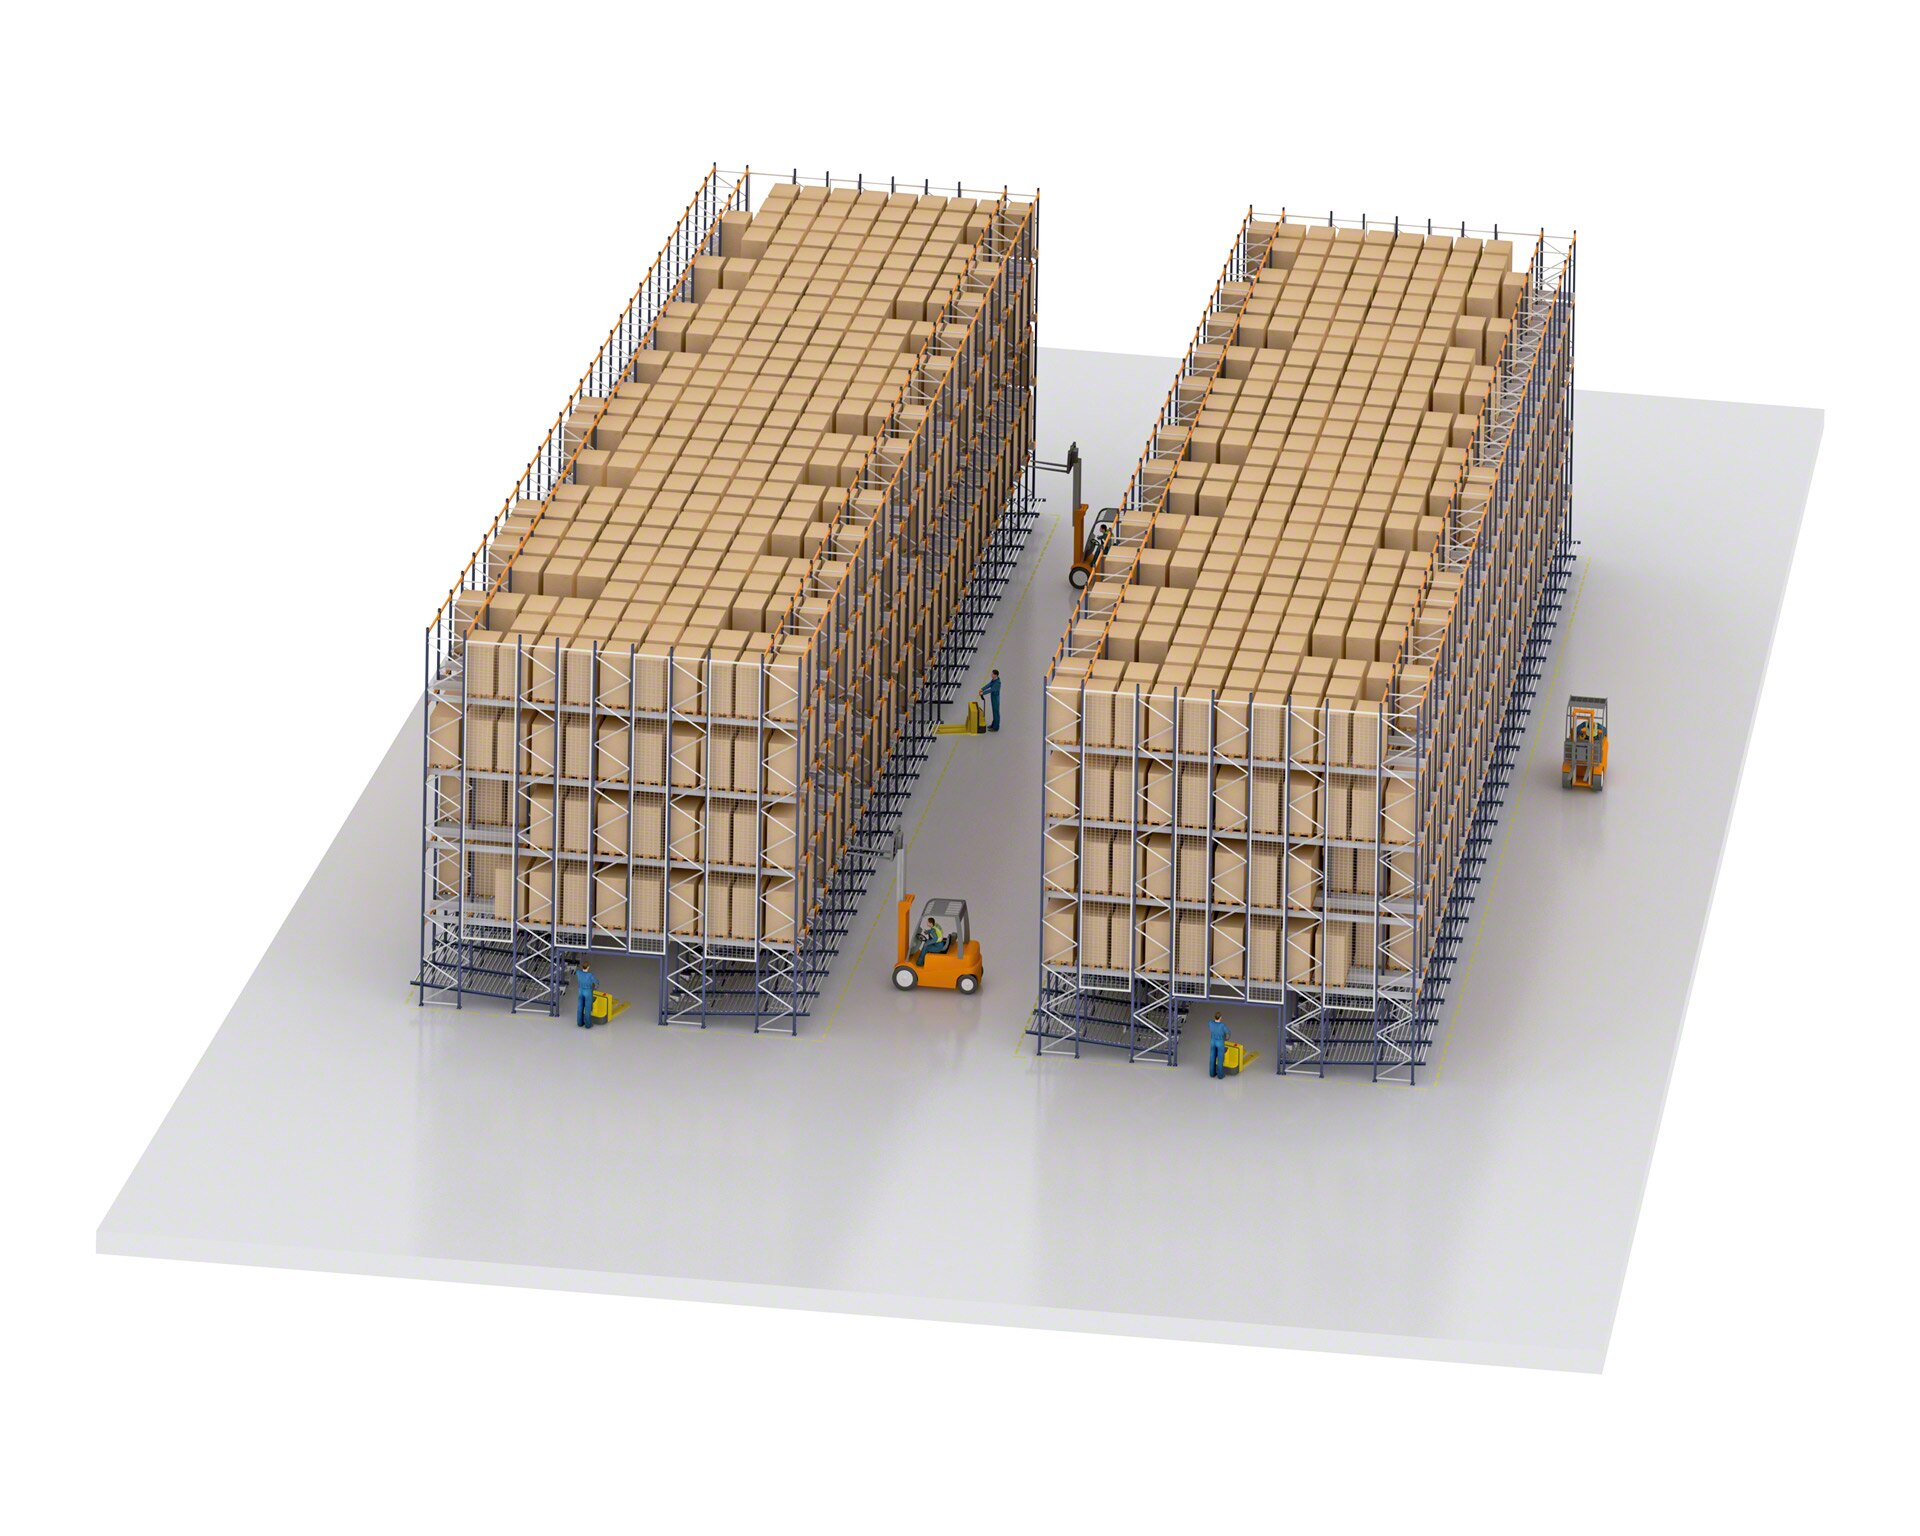 In high rotation warehouses with Pallet Shuttle, part of the system is reserved for live storage racks for picking